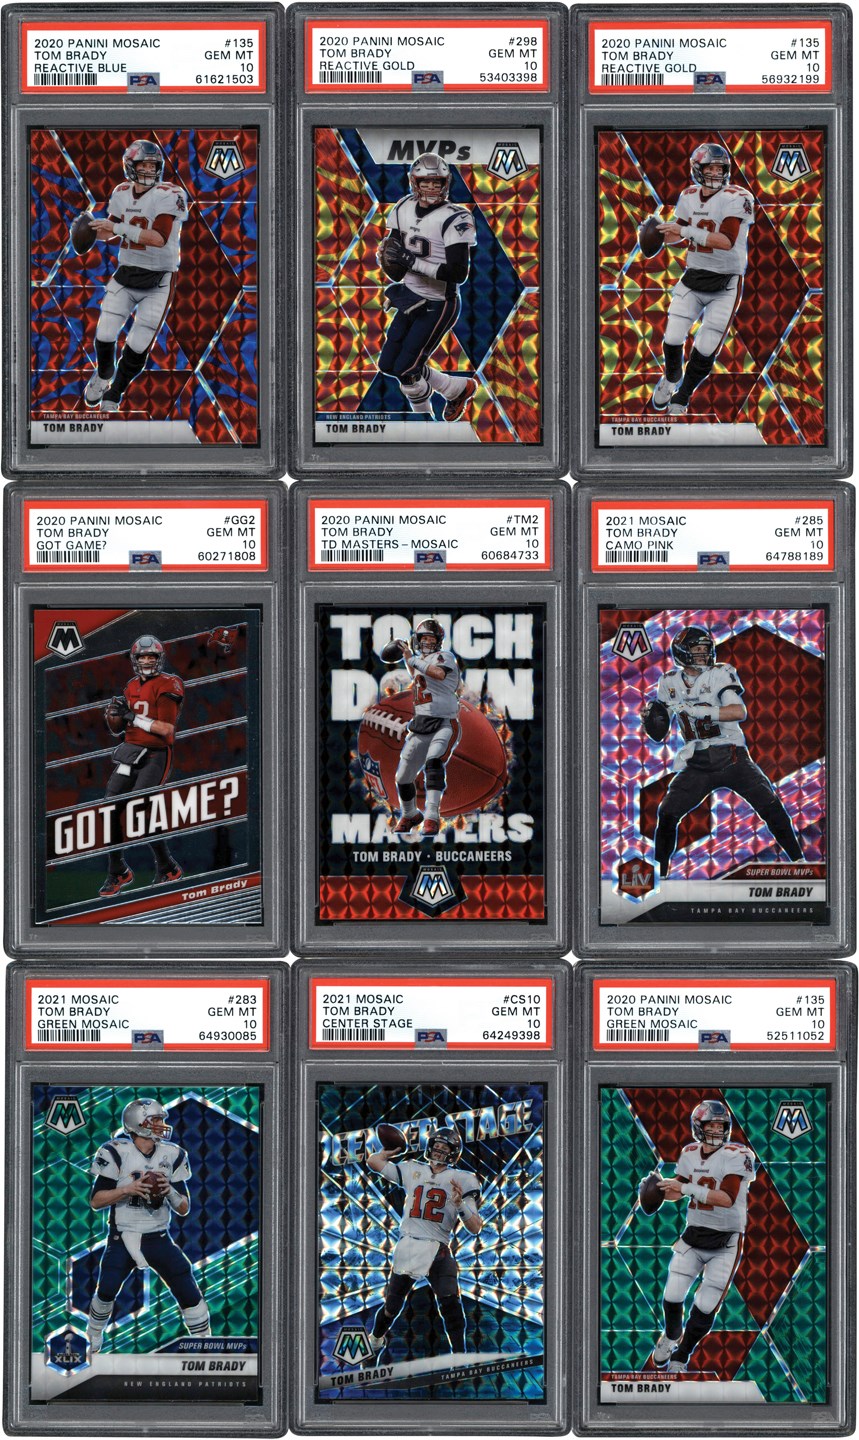 - 2020-2021 Panini Mosaic Tom Brady PSA GEM MINT 10 Collection with Color Inserts (18)